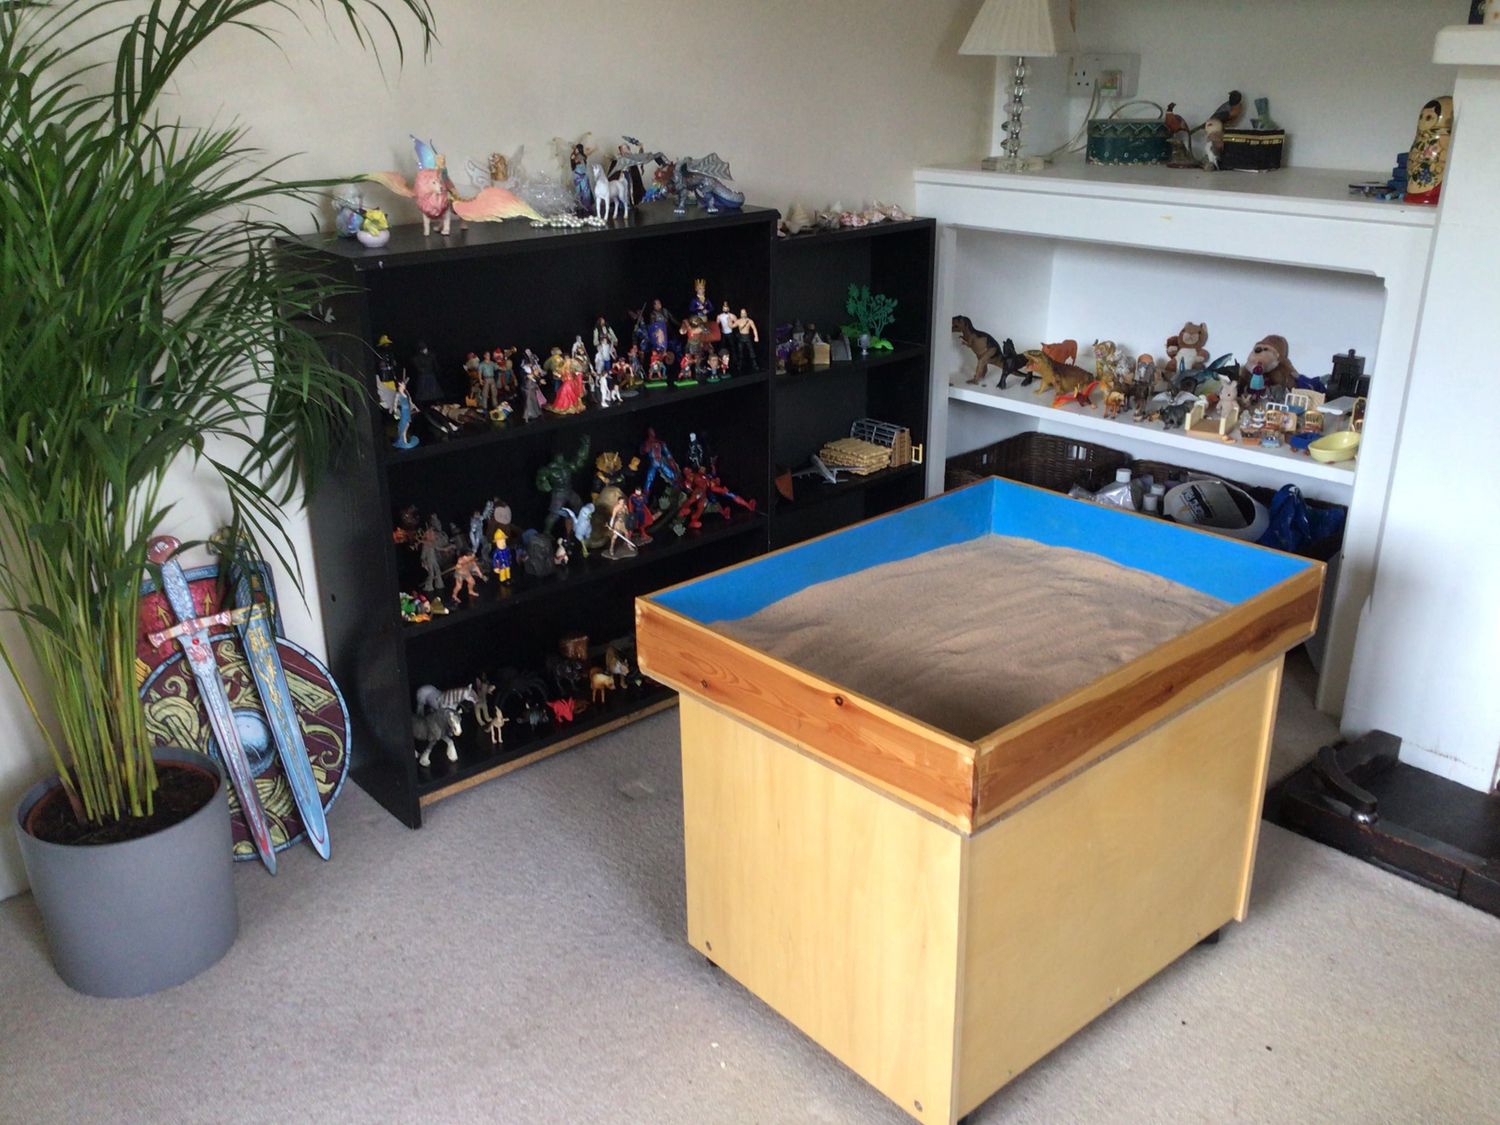 Gallery Photo of Sand tray and mini world figures